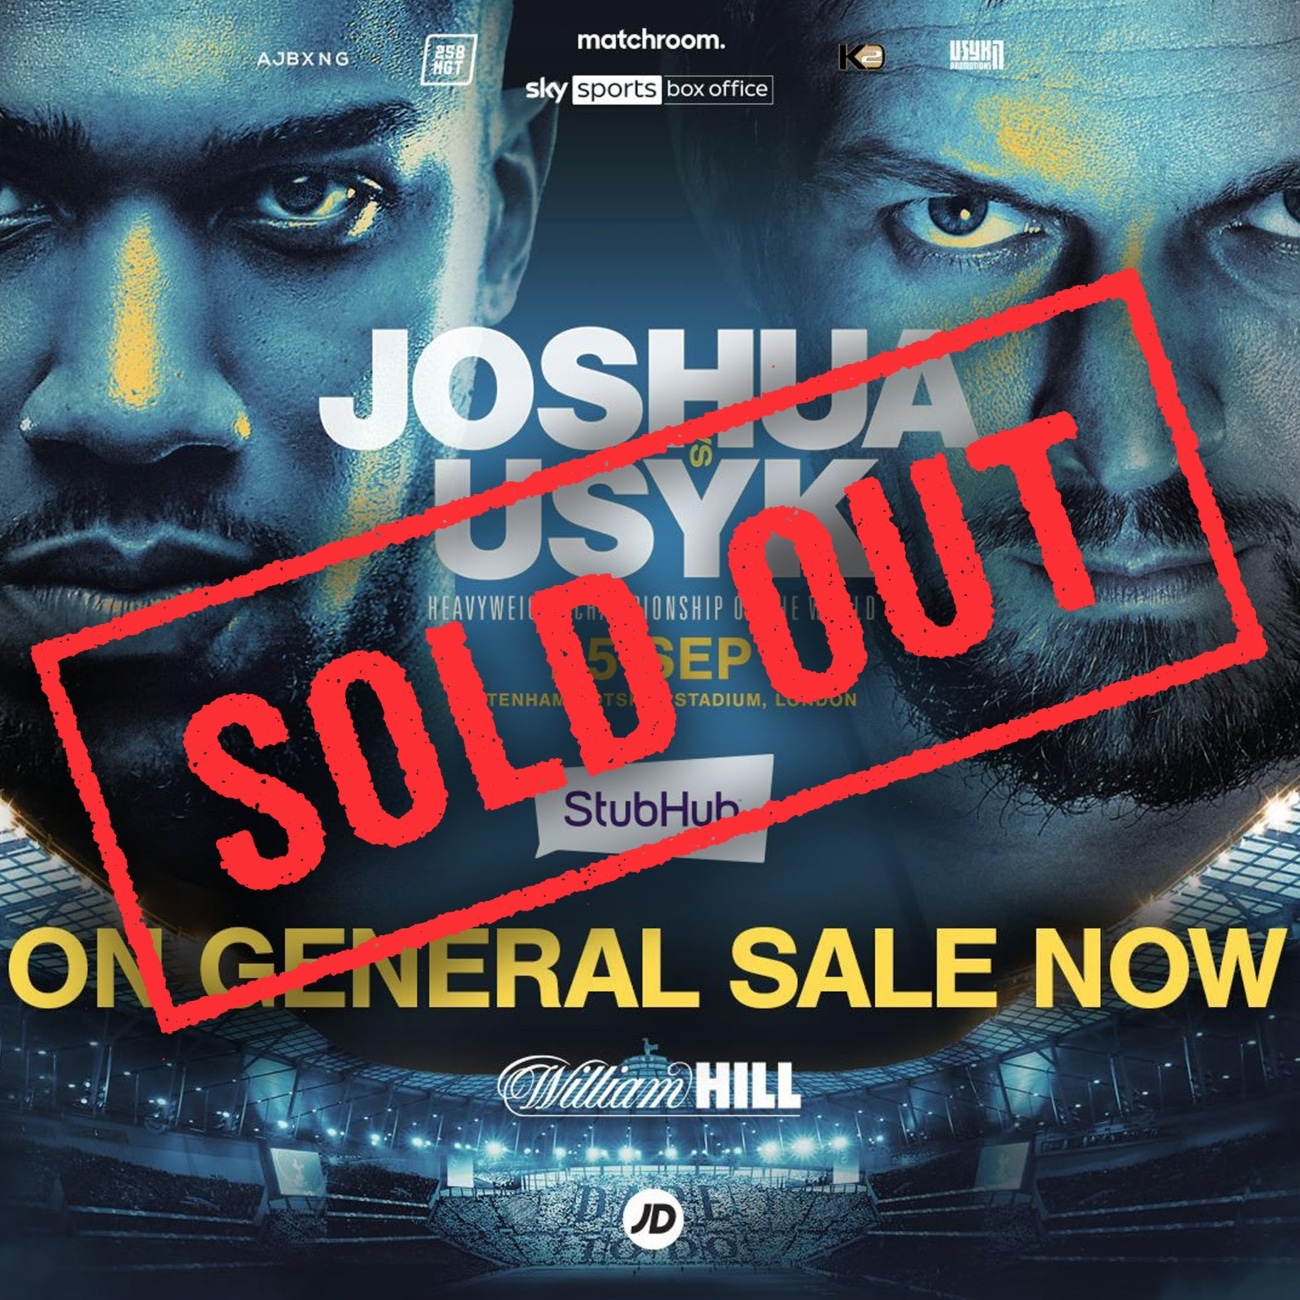 Image: Joshua vs. Usyk tickets already sold out for Sept.25th fight